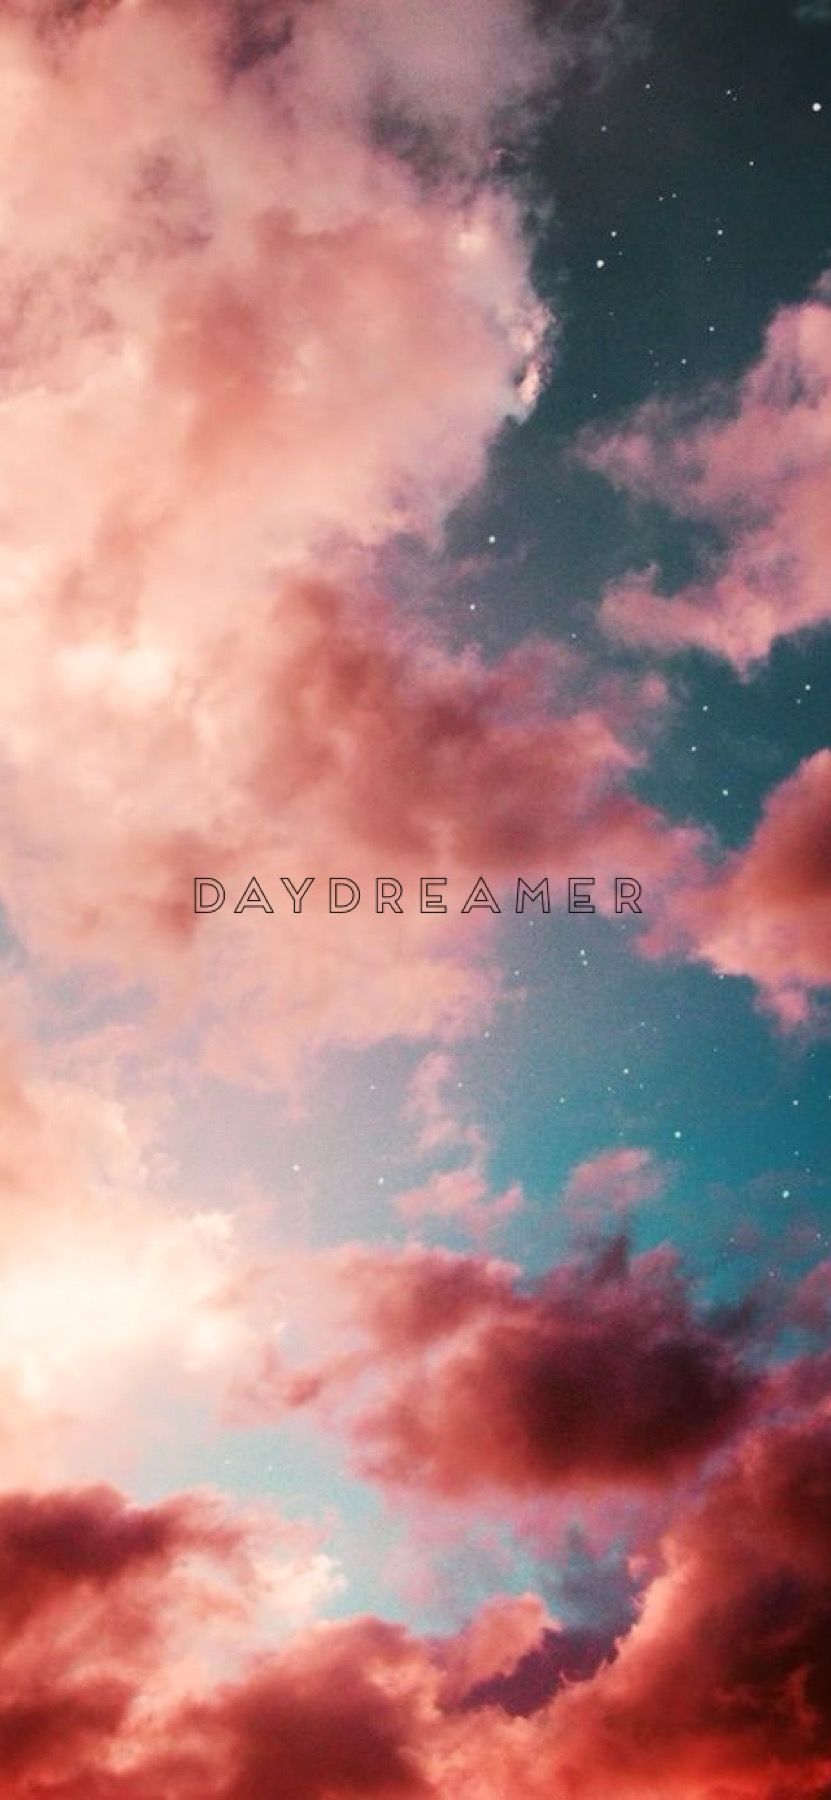 Wallpaper Daydreamer. Aesthetic background, Daydream, Cute profile picture